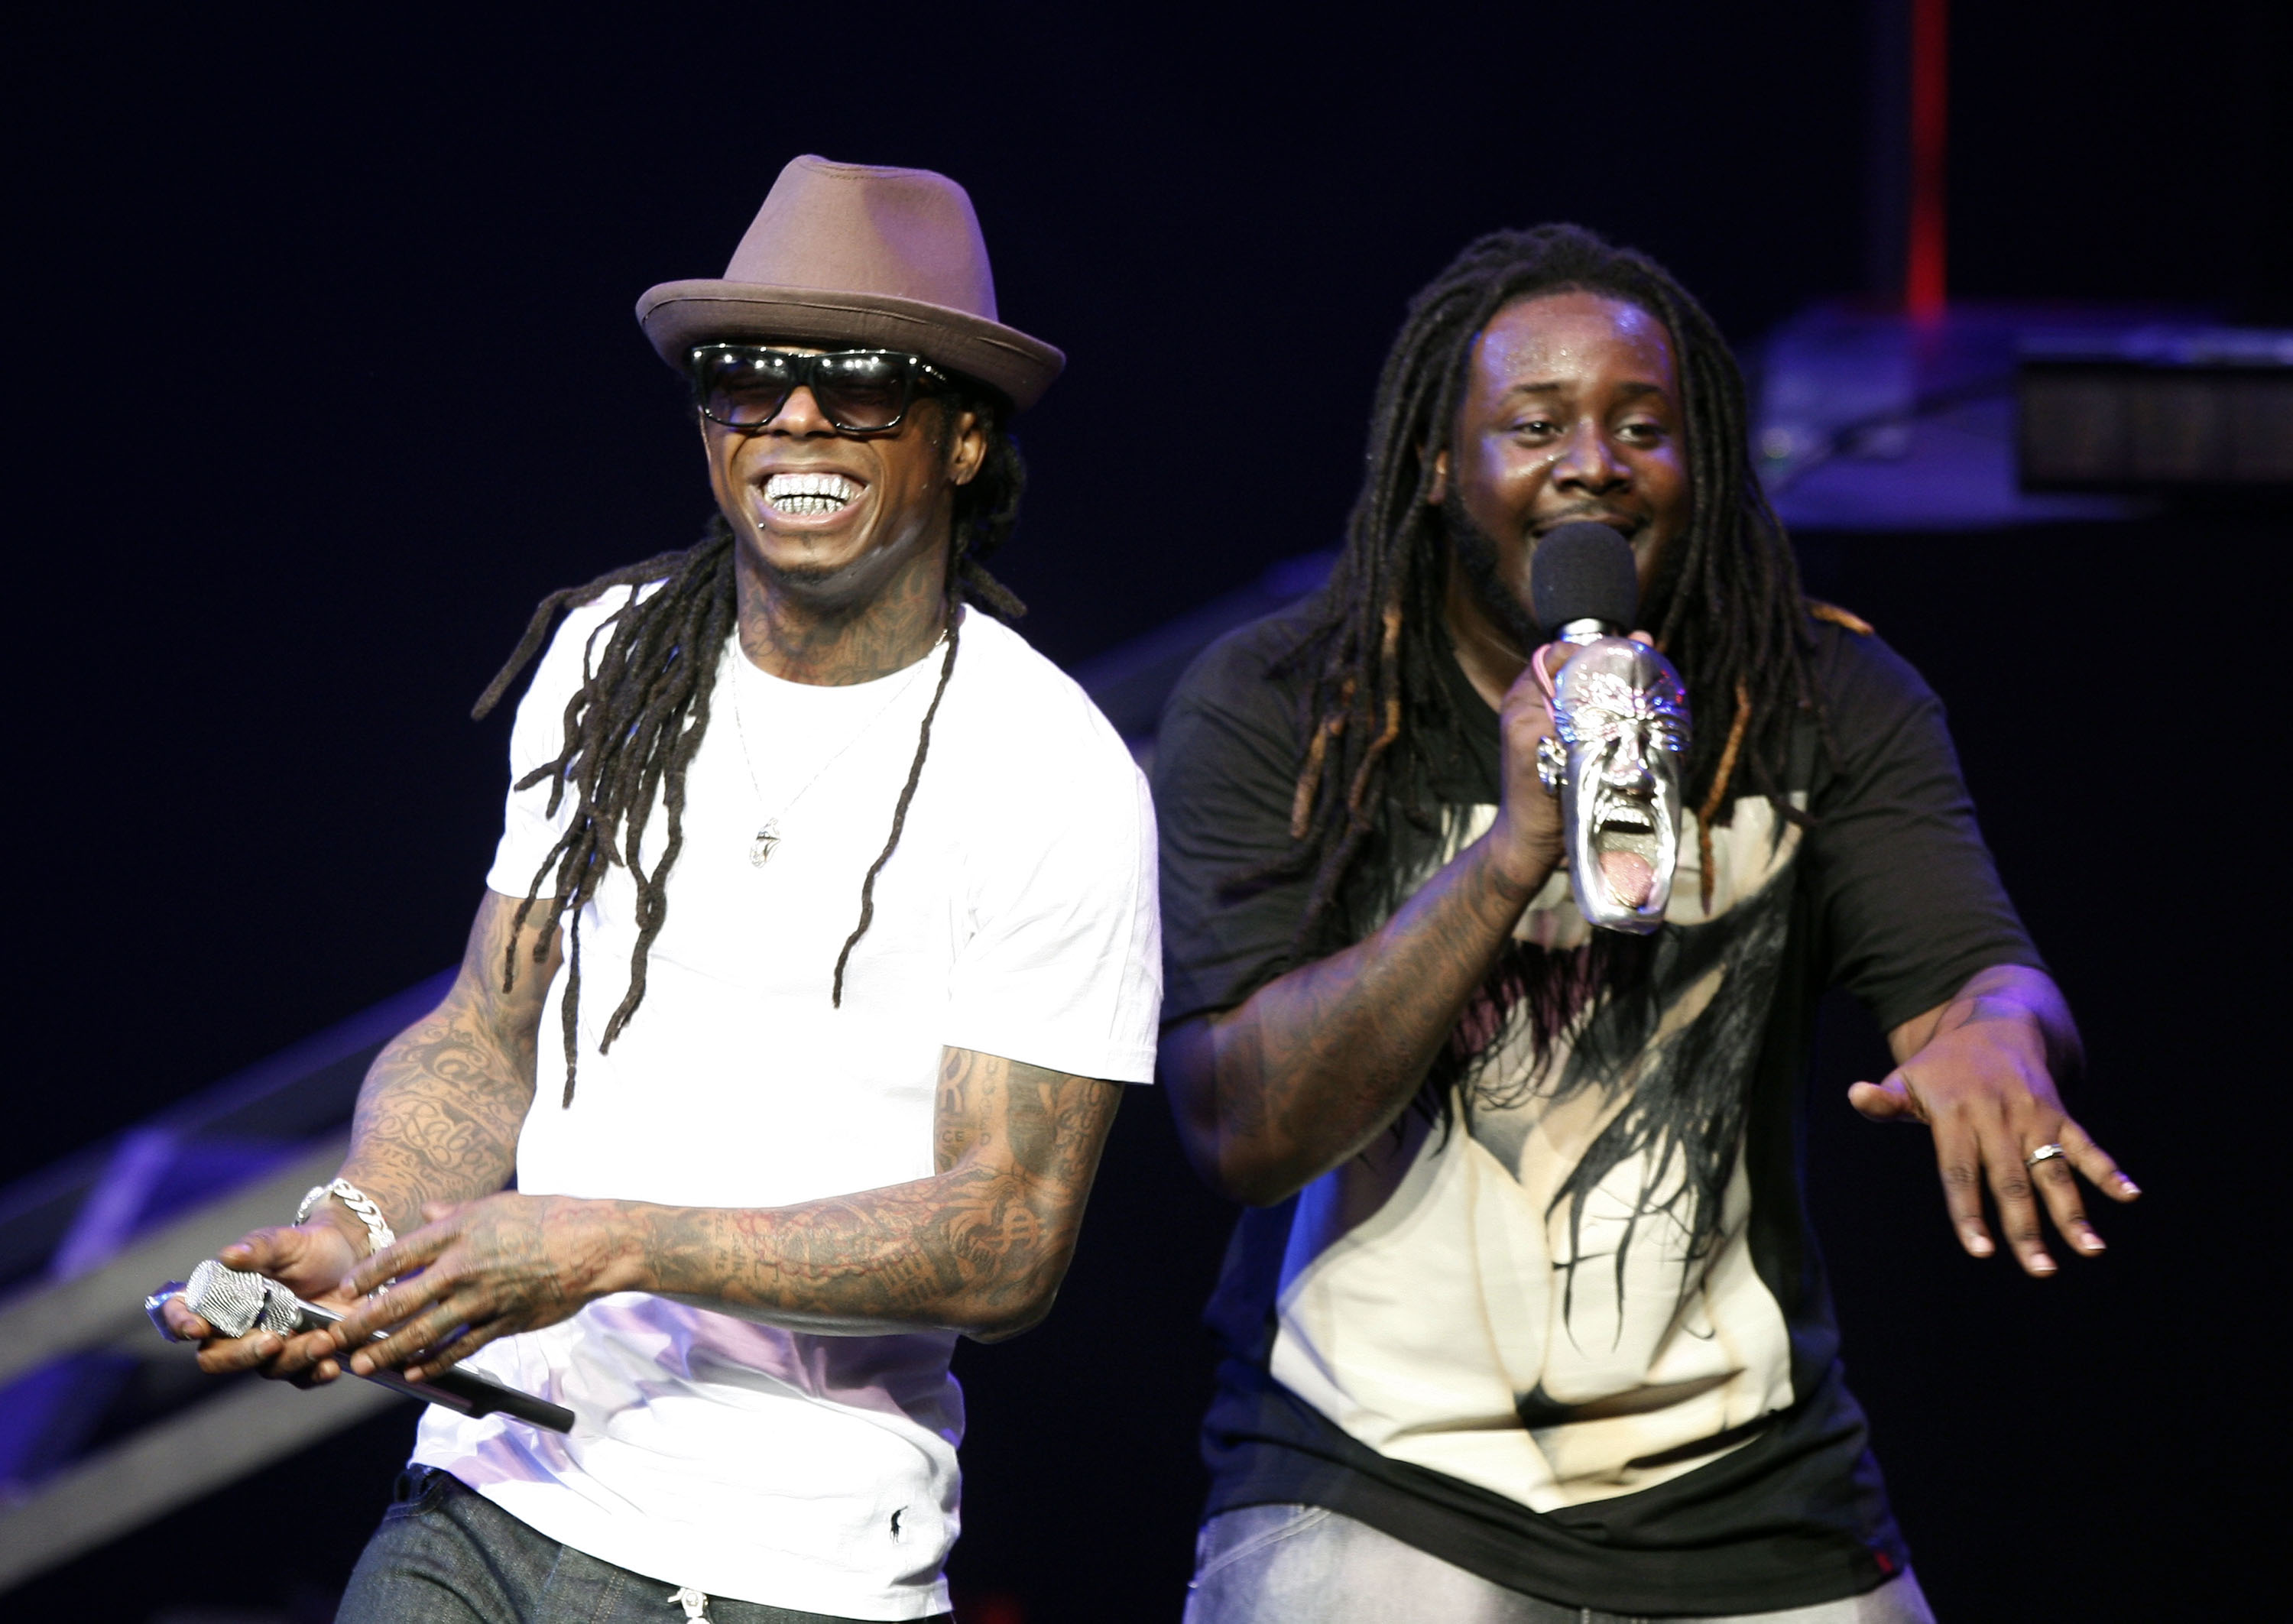 Rapper T-Wayne Defends His Name Following Backlash From T-Pain & Lil Wayne Fans